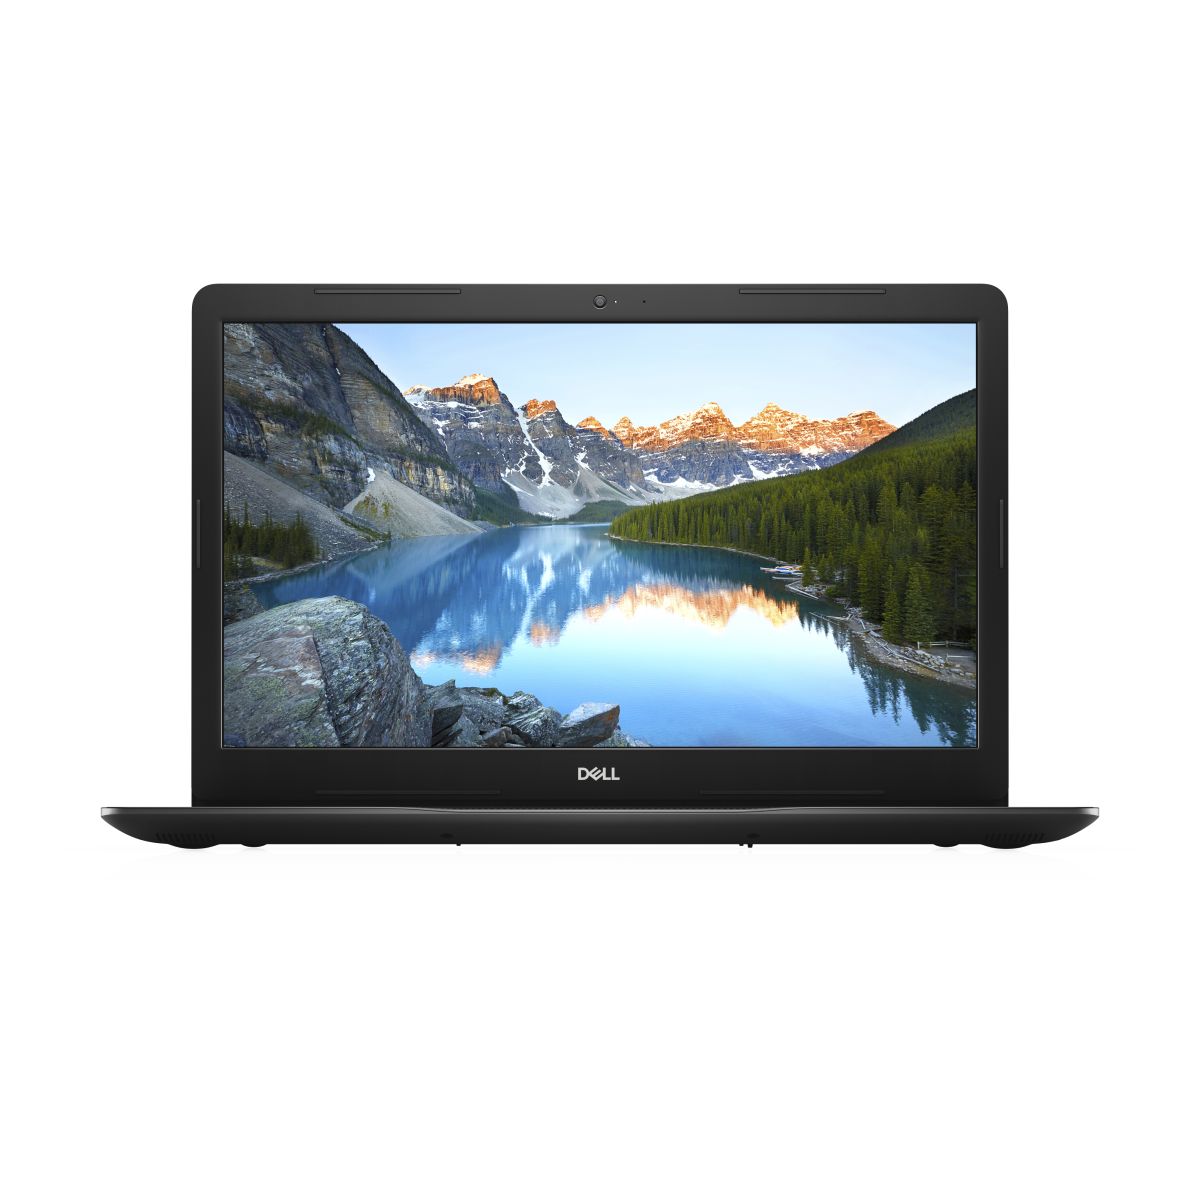 Dell Inspiron 3780 3780 7075 Laptop Specifications 1102